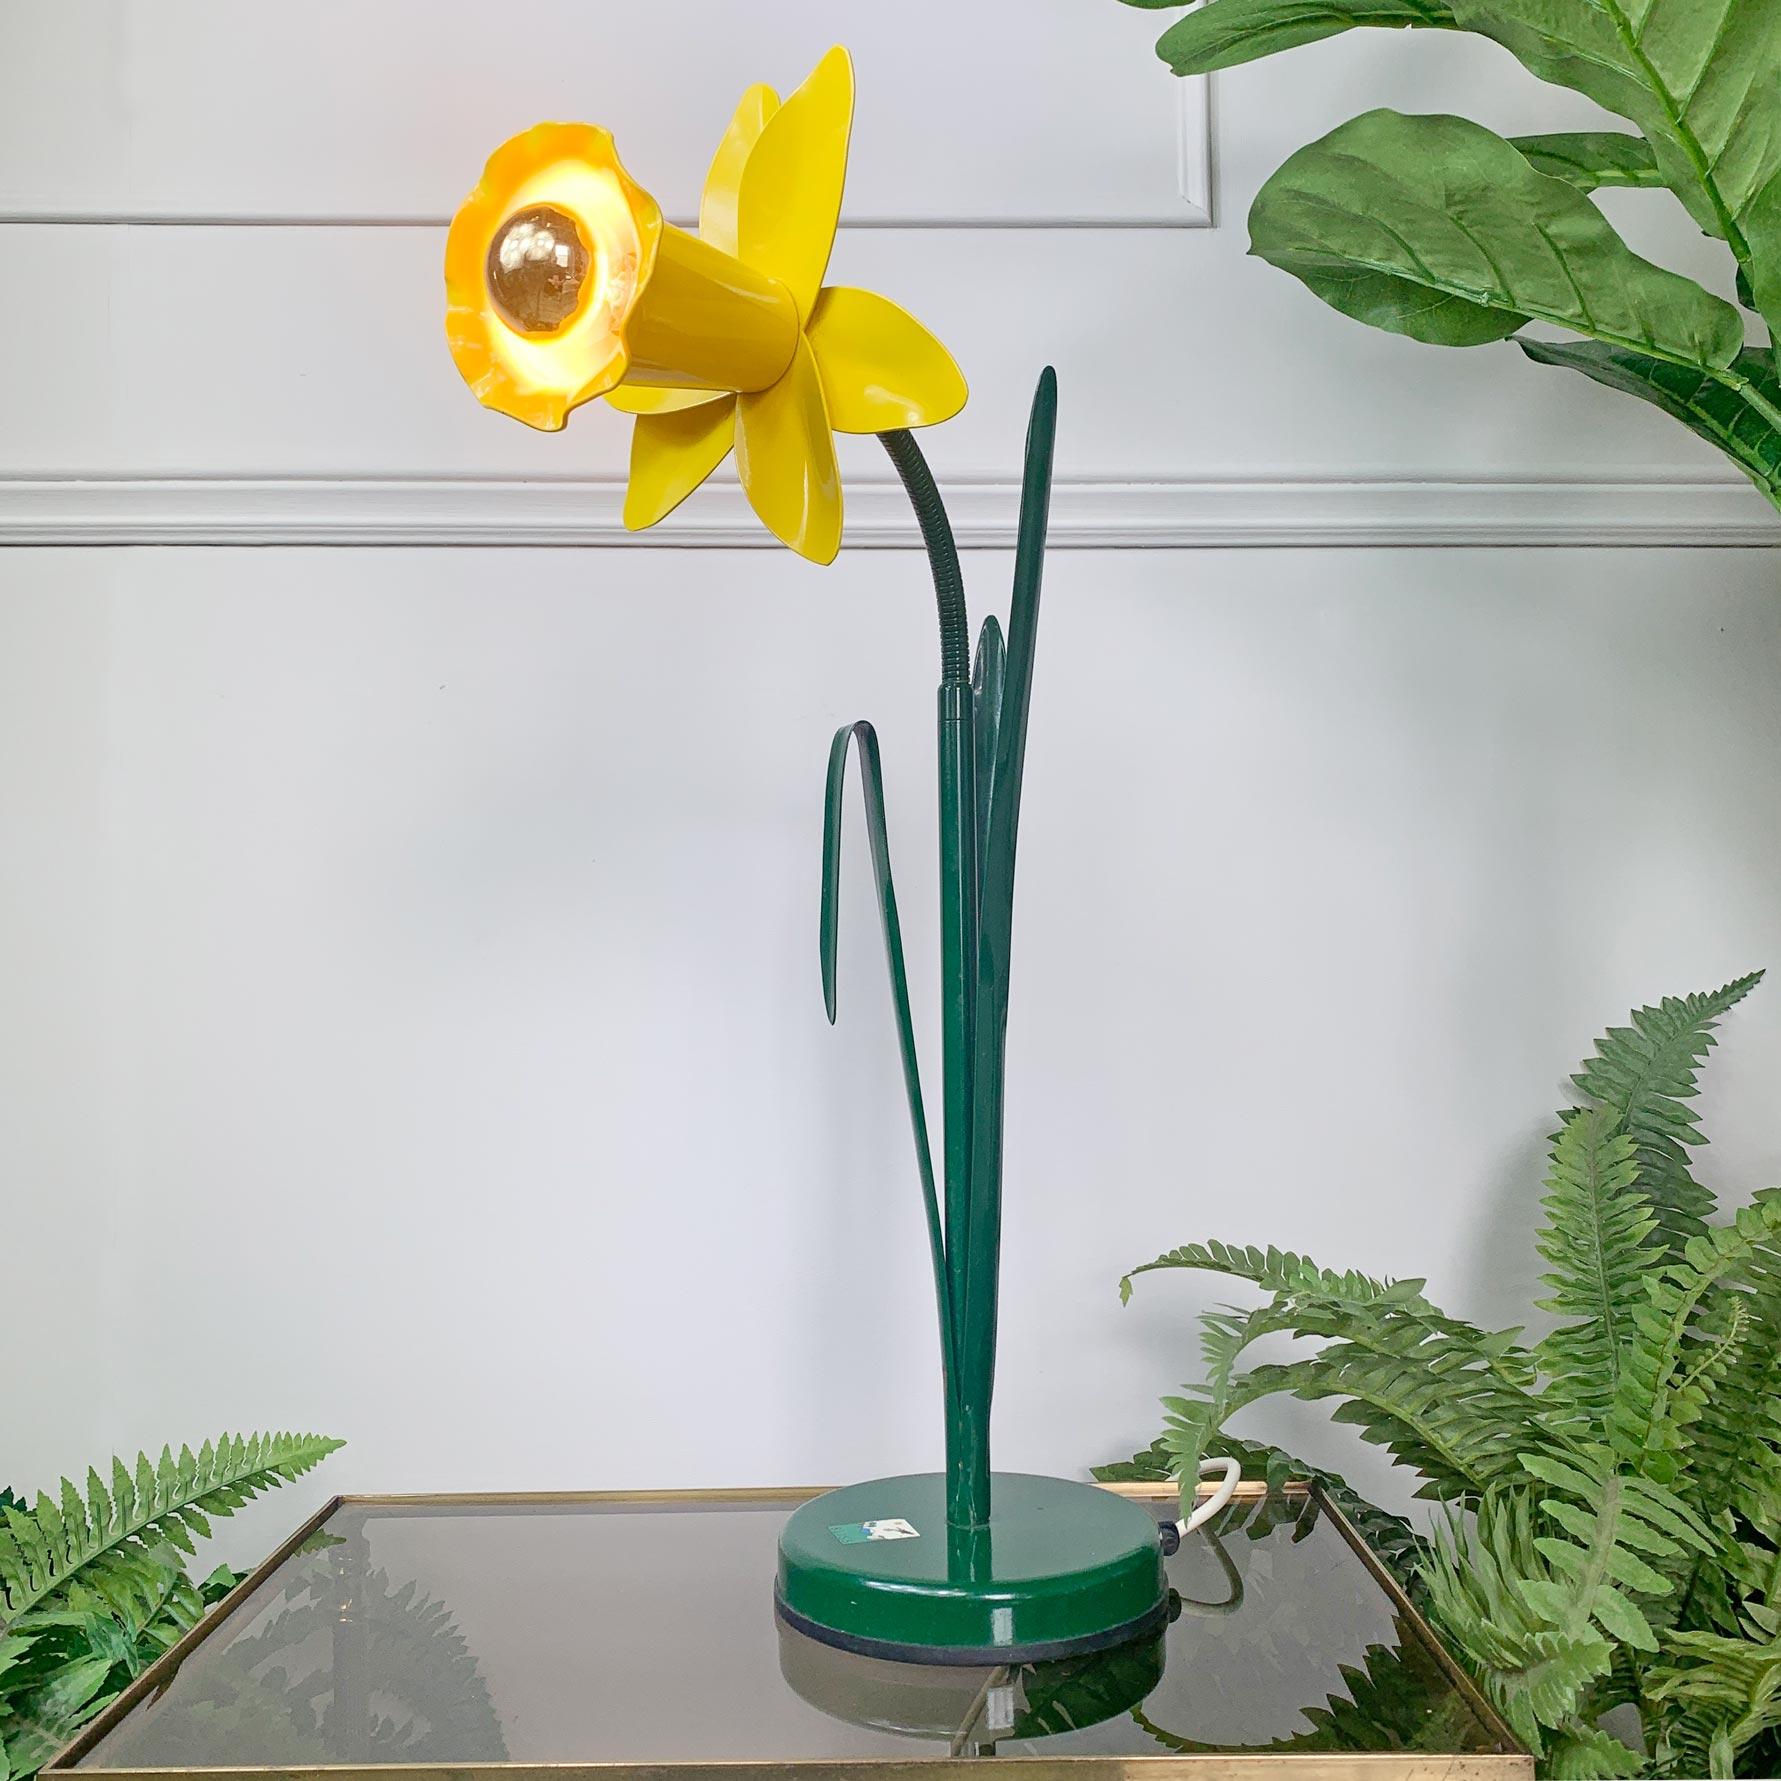 Iconic 'Bliss' designer daffodil table lamp
Yellow metal daffodil shaped lamp, designed in the UK by bliss in the 1980's
This example is in fantastic condition, only one small loss of enamel as shown.

Measures: 55cm height (as shown in